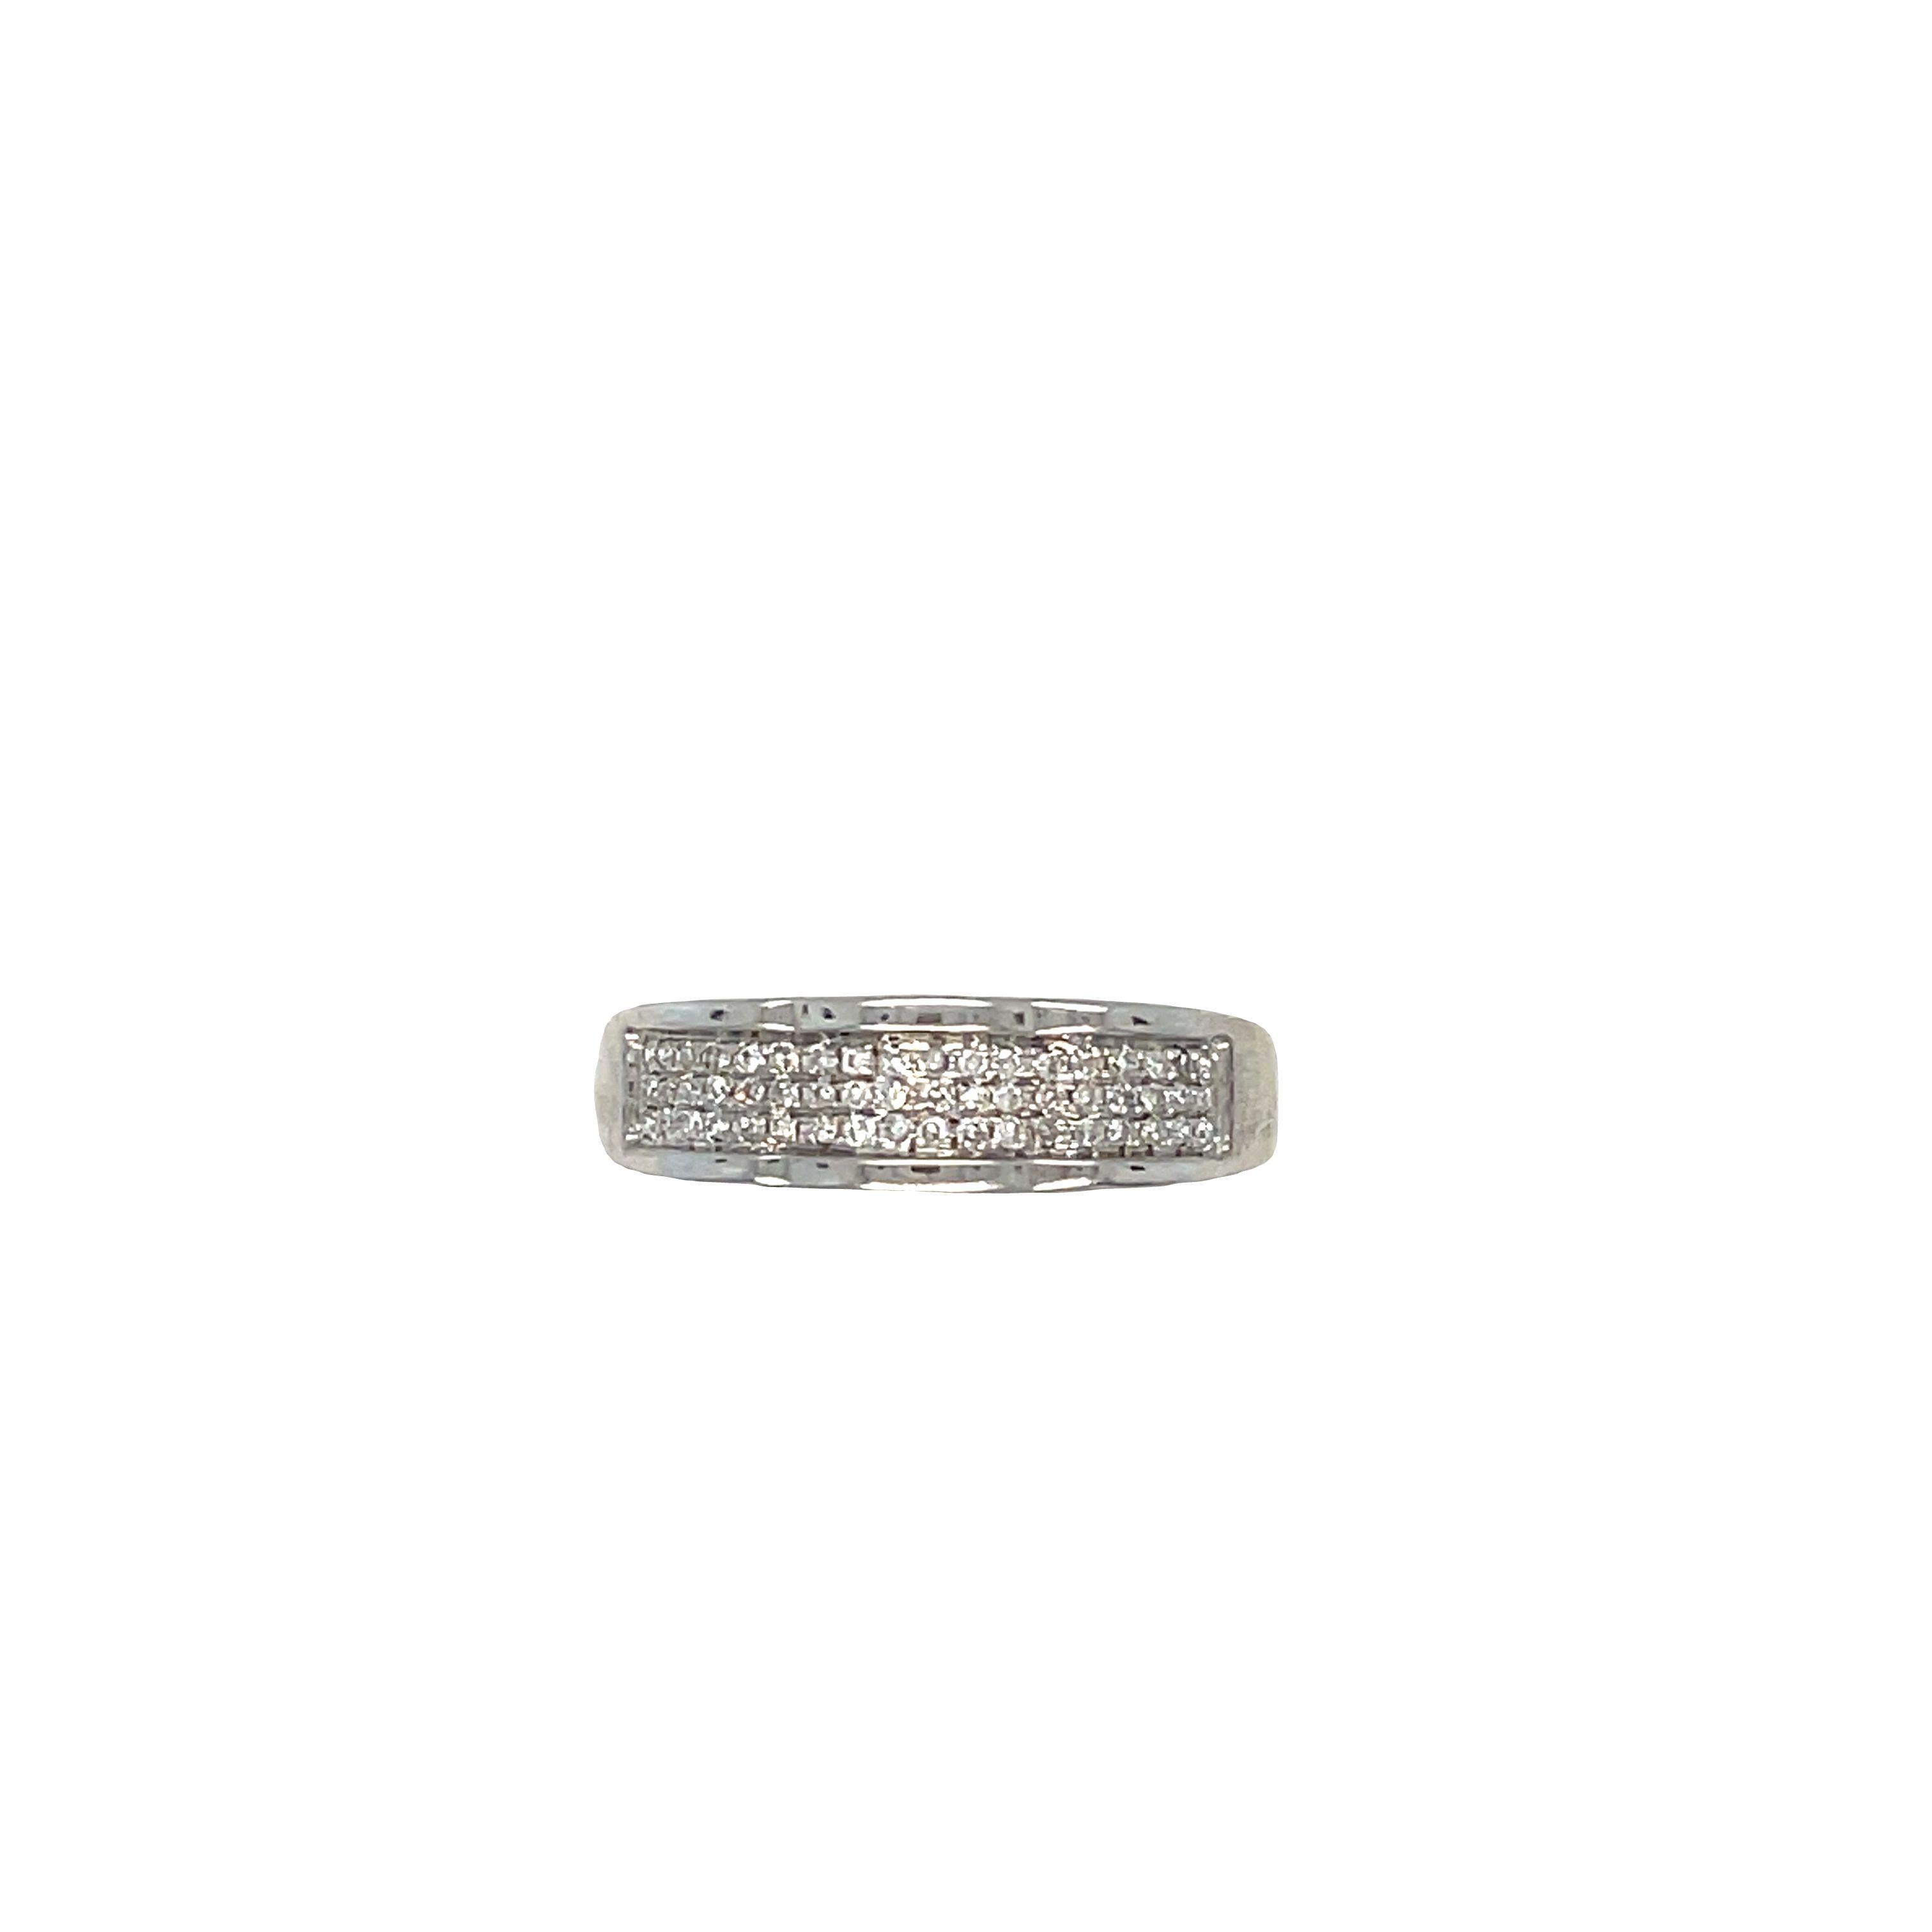 Stunning 14K White Gold Half Eternity Pave-Set Diamond Wedding Band, a symbol of eternal love and beauty. This beautiful band features three rows of eighteen round brilliant-cut diamonds, totaling fifty-four diamonds. The diamonds weigh